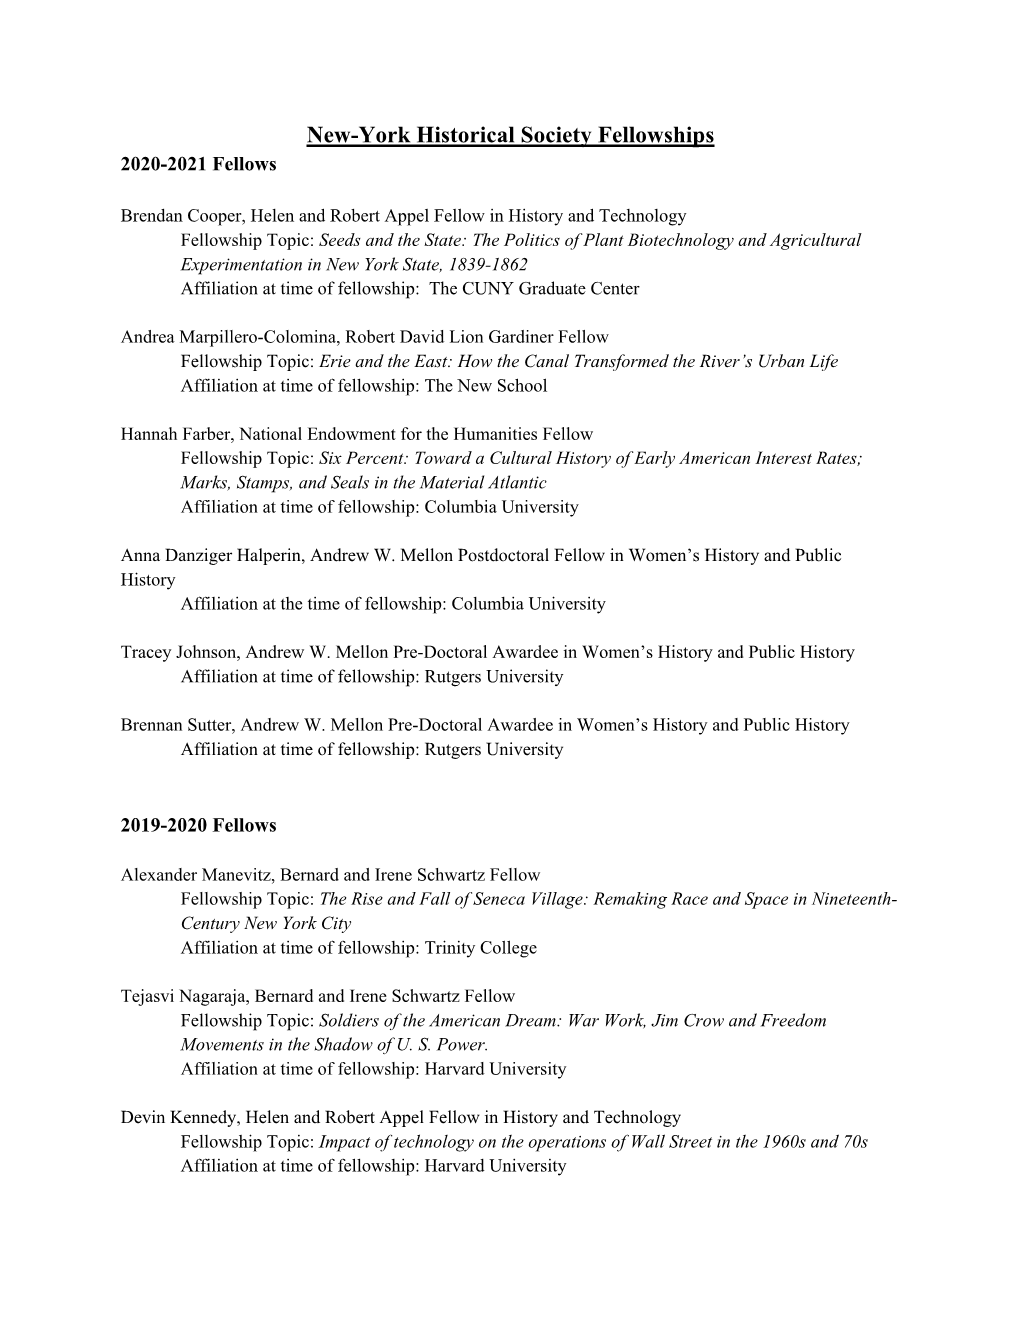 New-York Historical Society Research Fellowship Recipients, 1999-2021